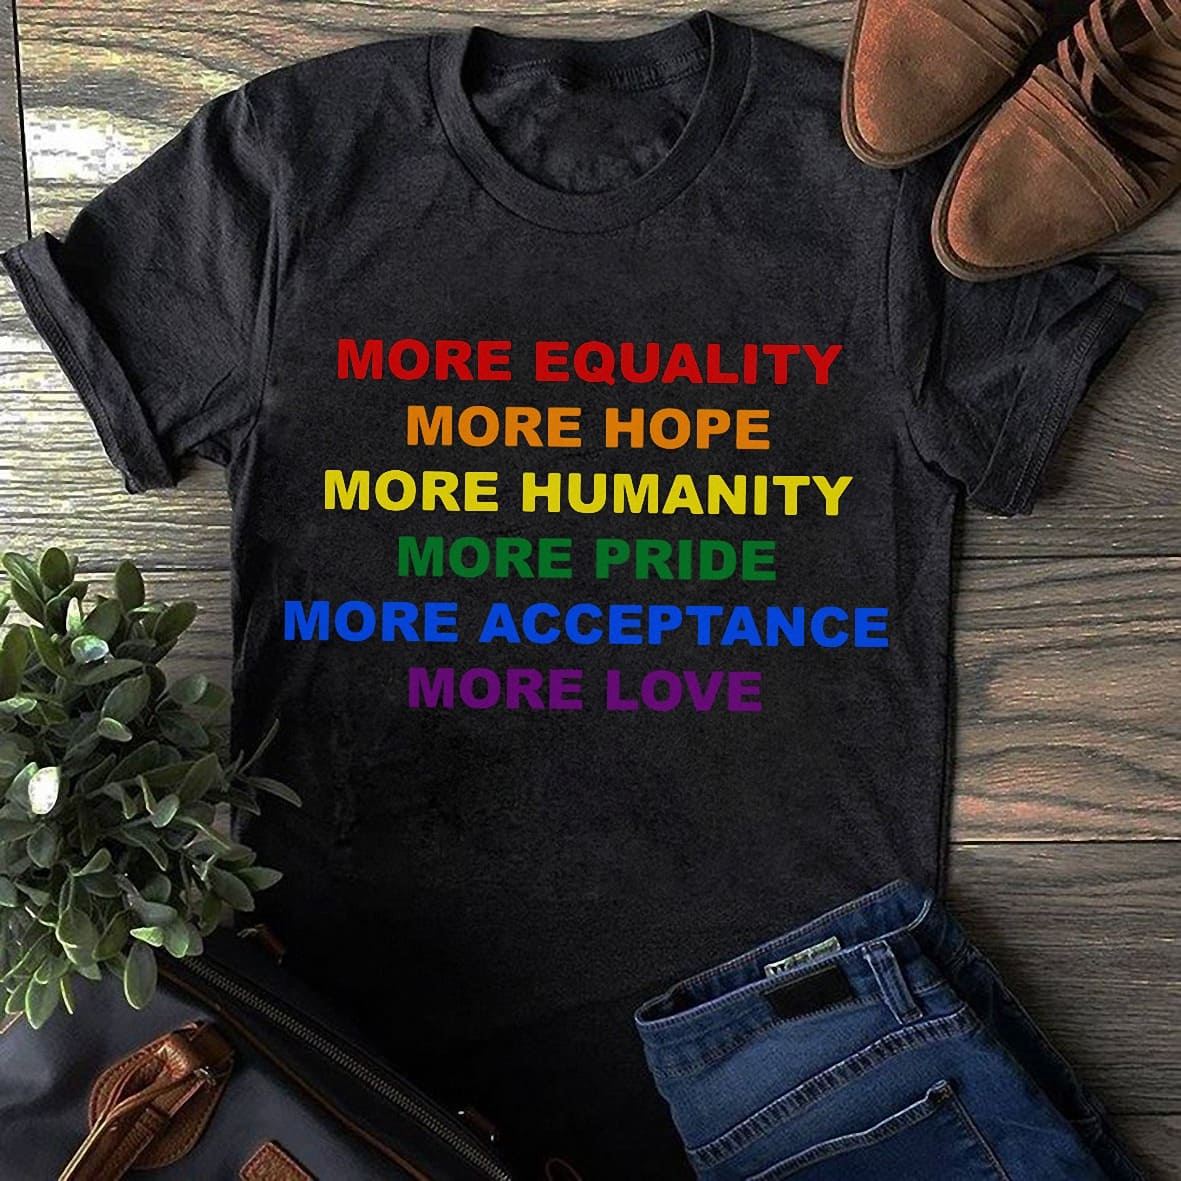 More equality, more hope, more humanity, more pride, more acceptance, more love - Lgbt community T-shirt